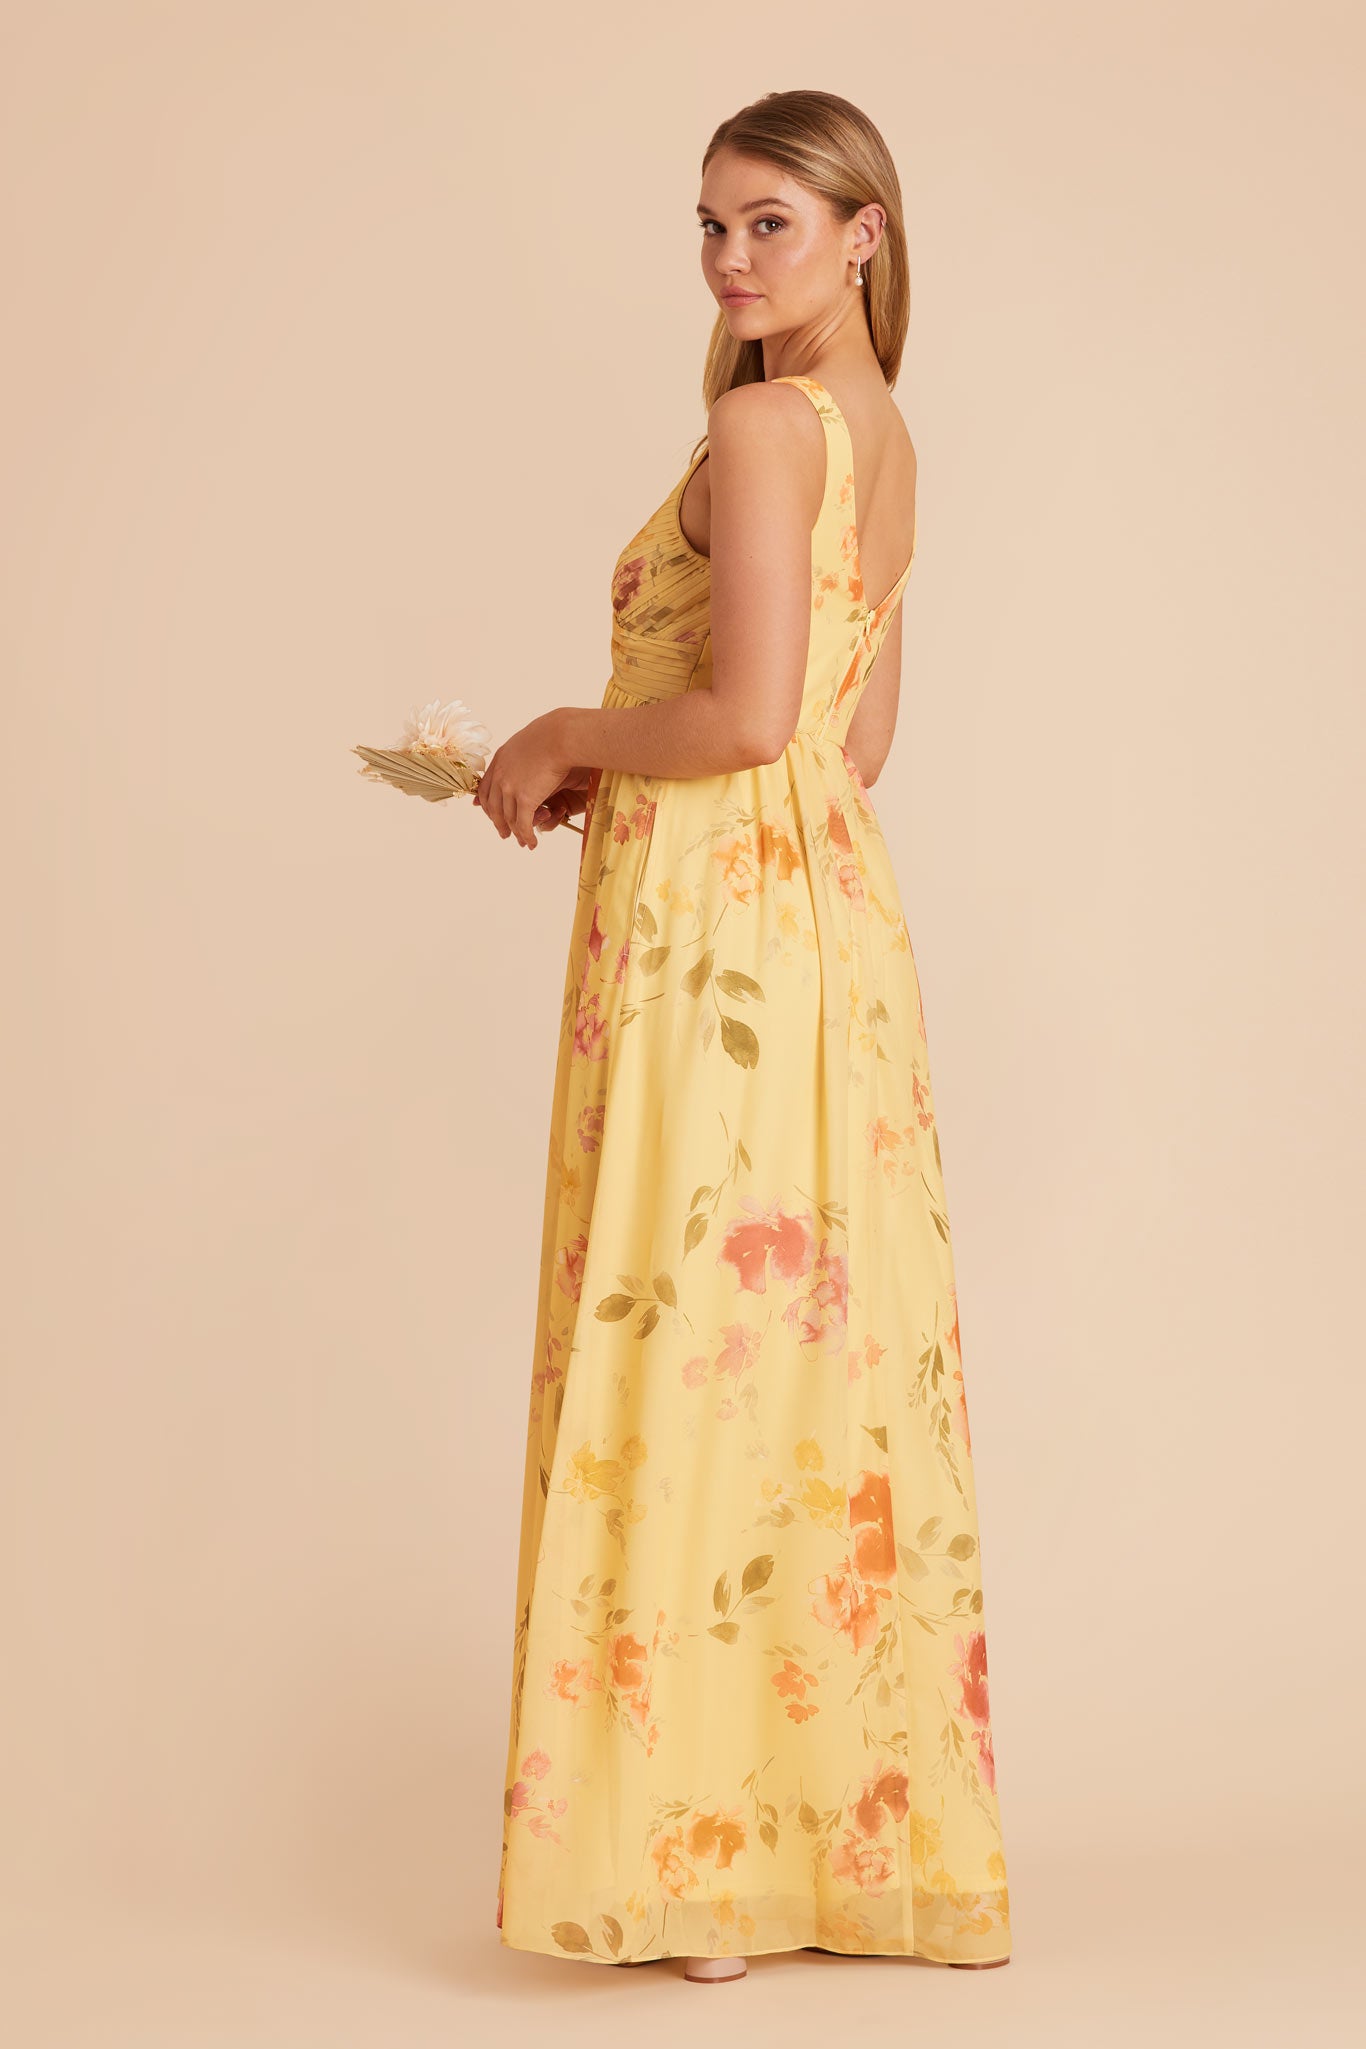 Pale Yellow Rococo Floral Laurie Empire Dress by Birdy Grey